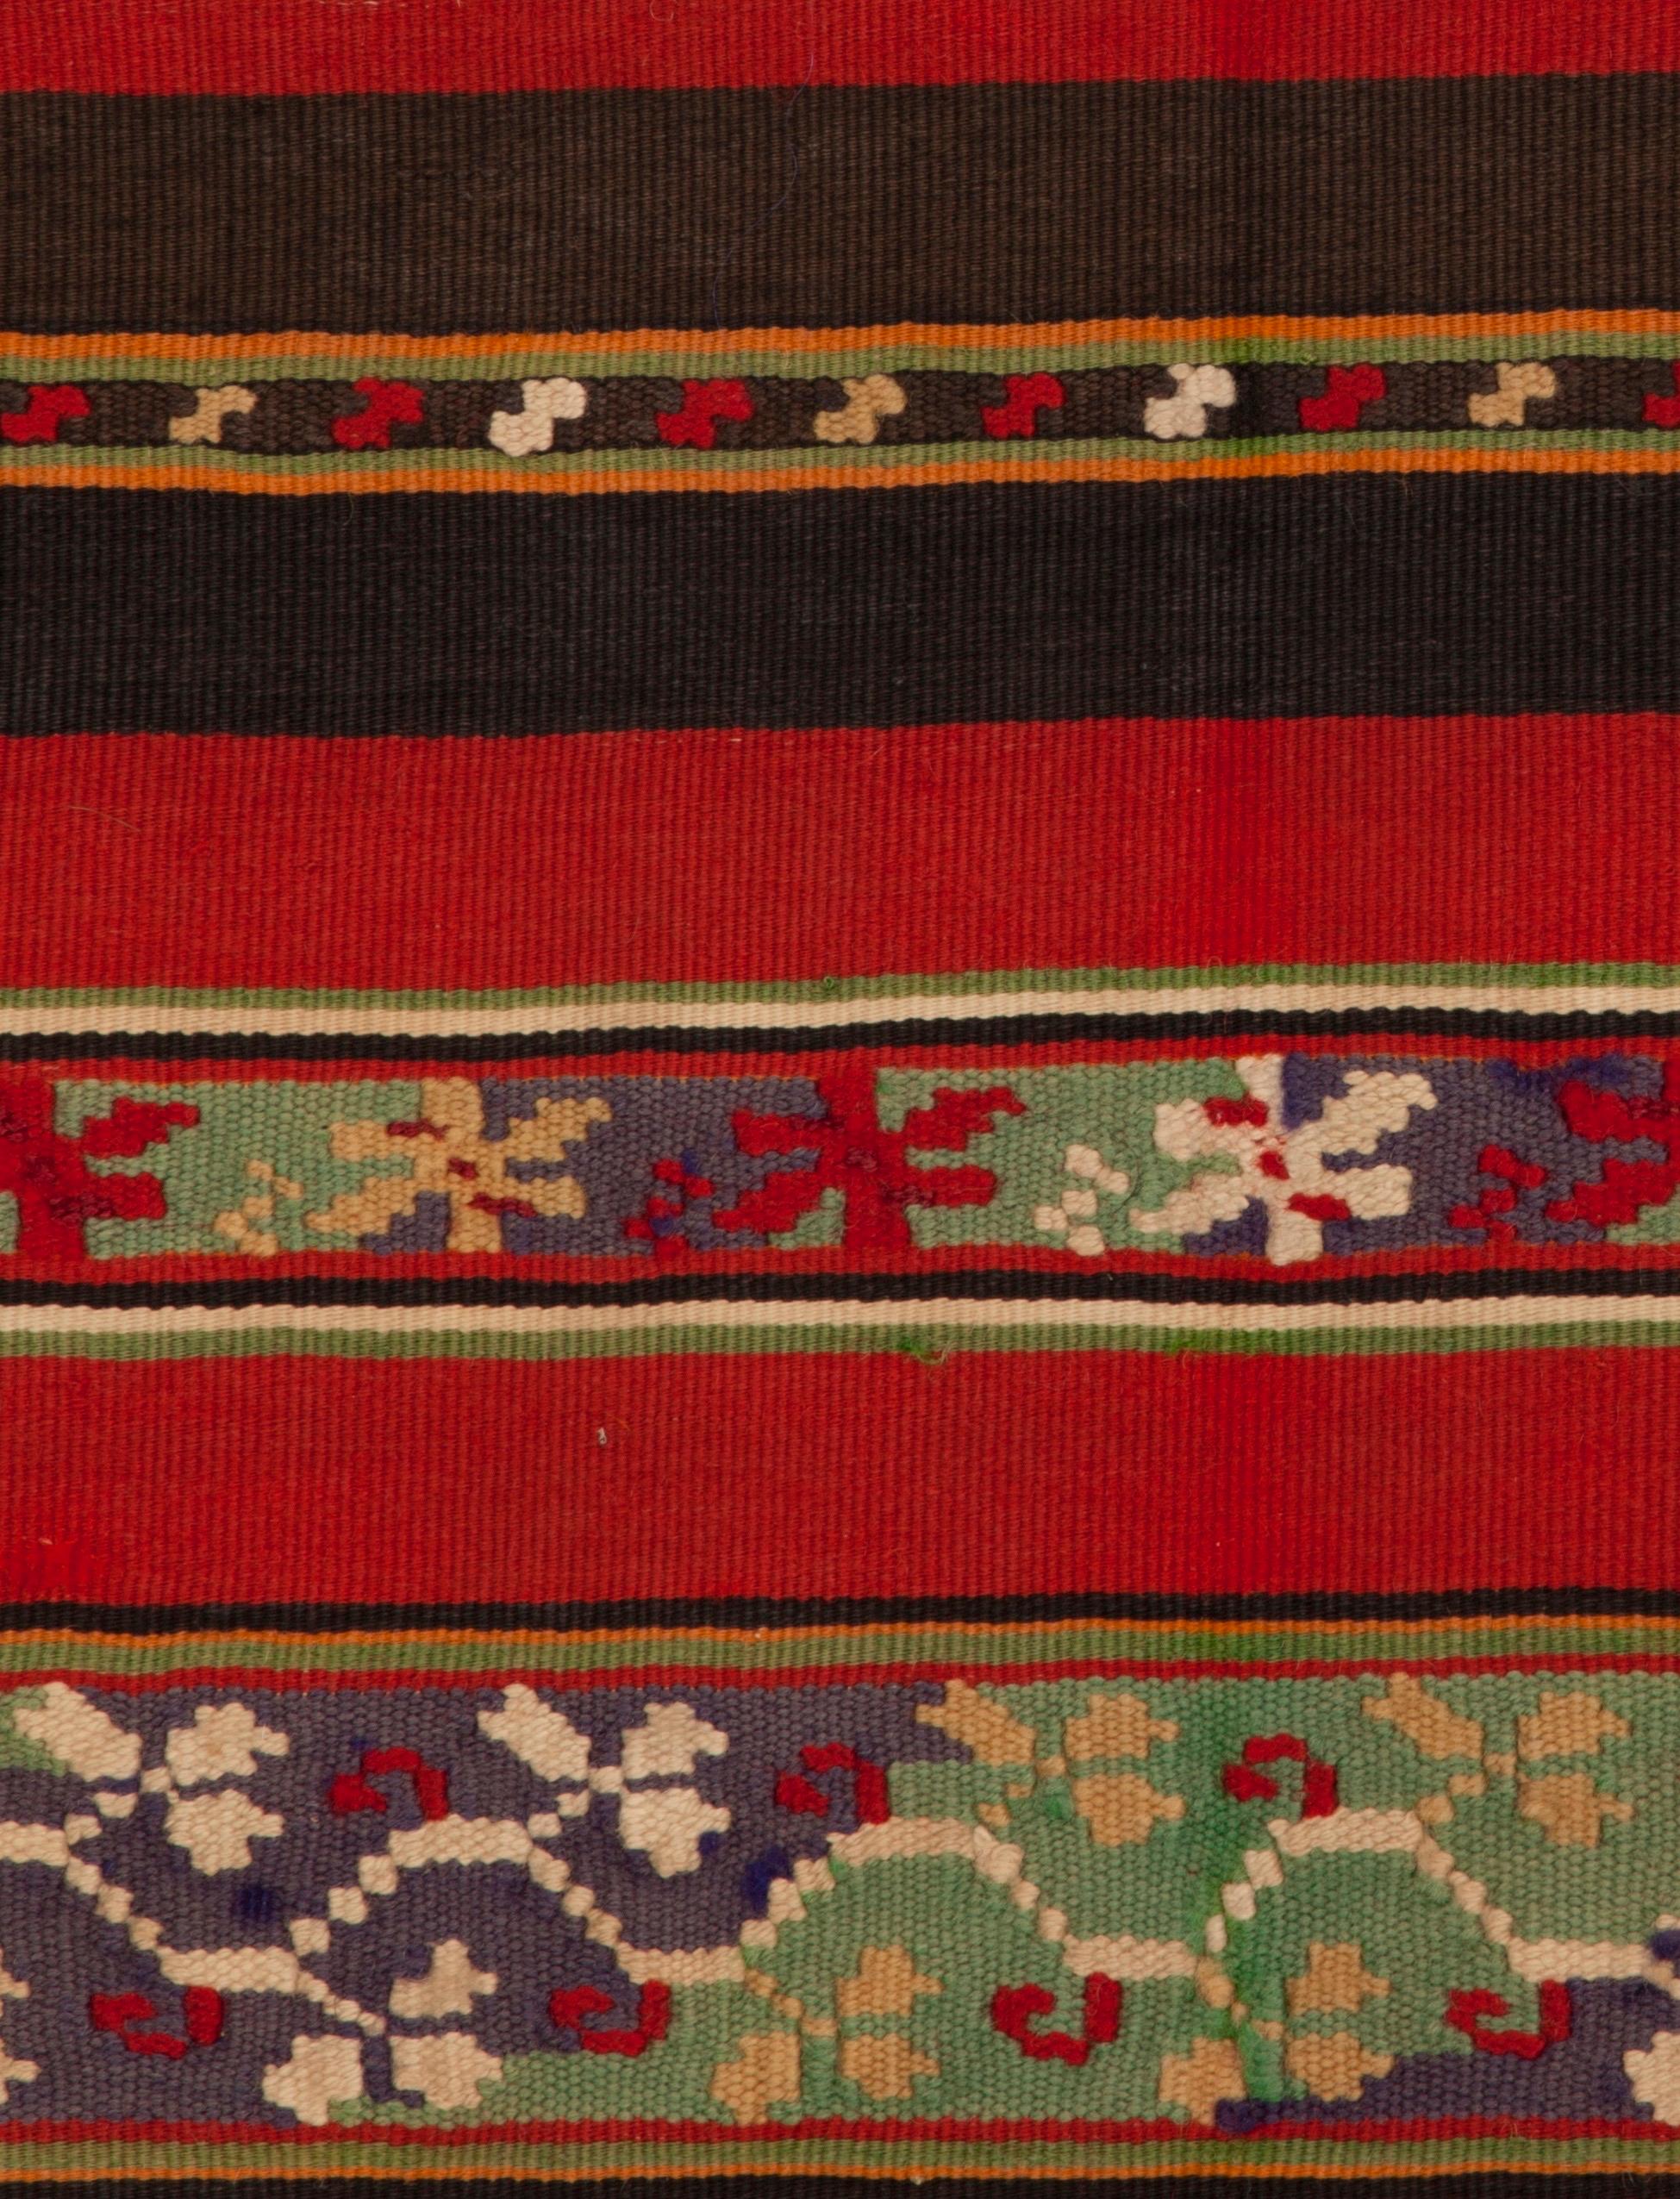 A mid-19th century Romanian finely woven long wool apron with stylized floral motifs and bold red stripes. Bound with 19th century printed cotton. See a similar example in the collection of the Metropolitan Museum of Art (accession # C.I.41.110.22).